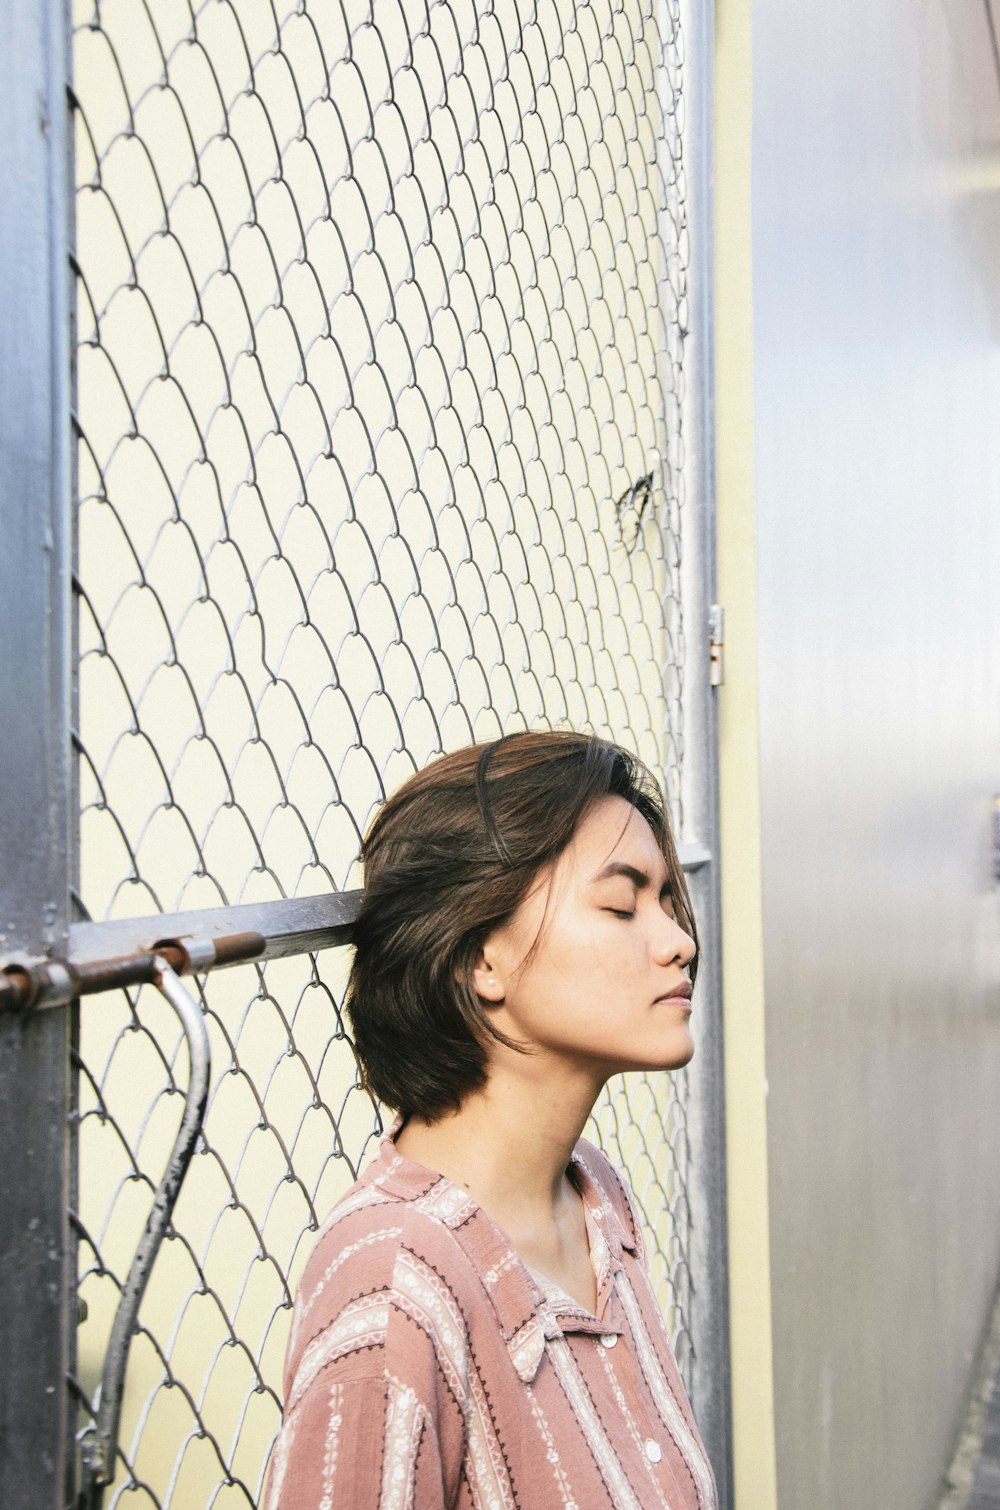 woman standing near wire fence